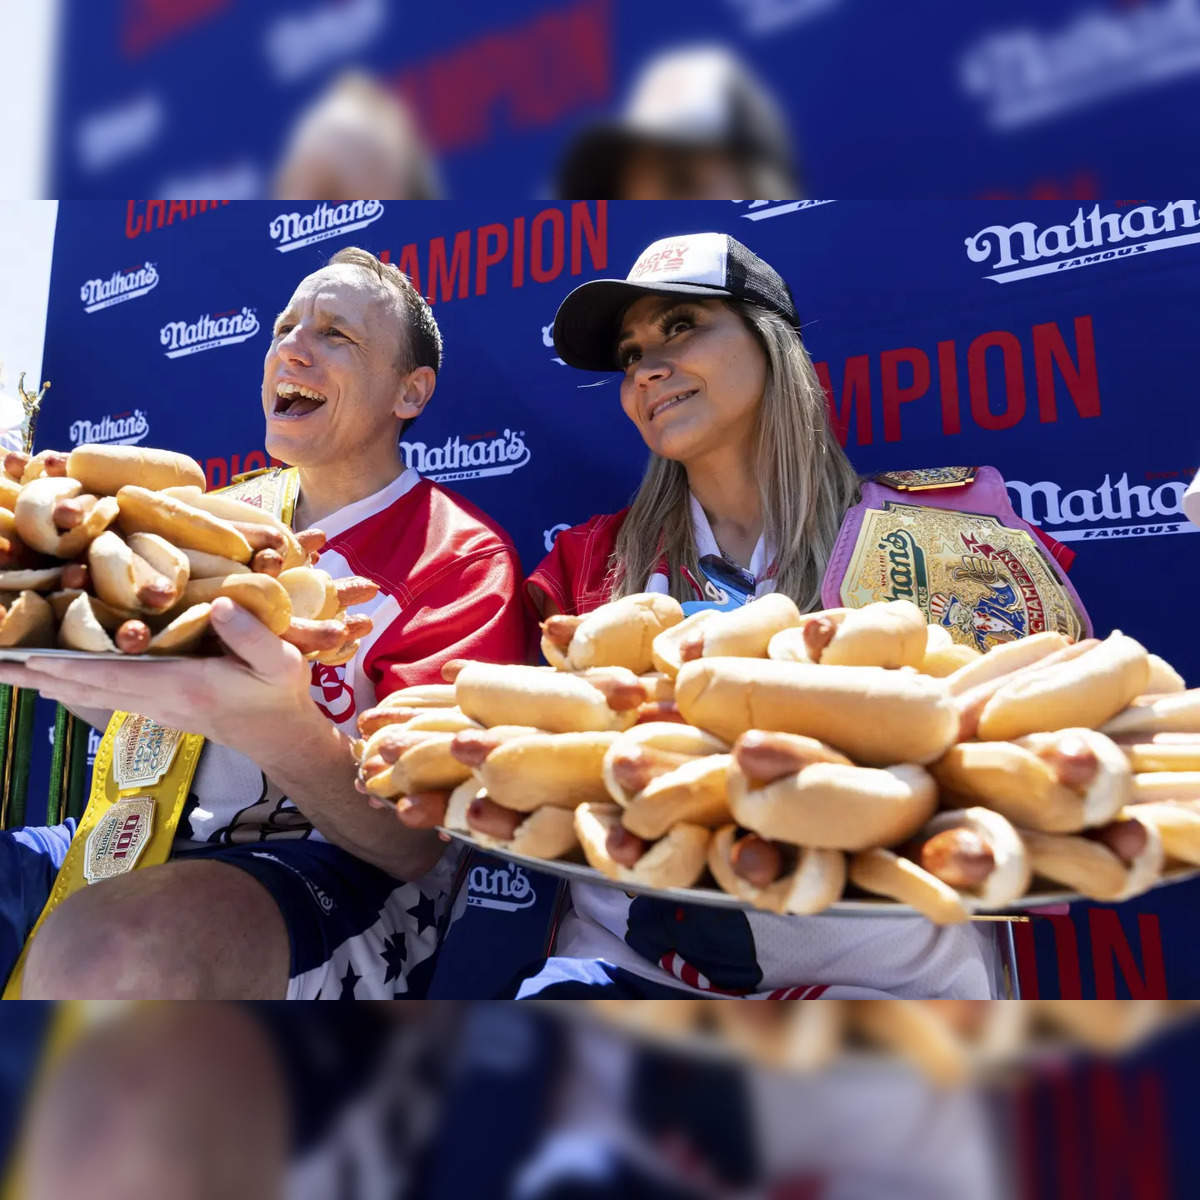 Photo: prize for winning hot dog eating contest